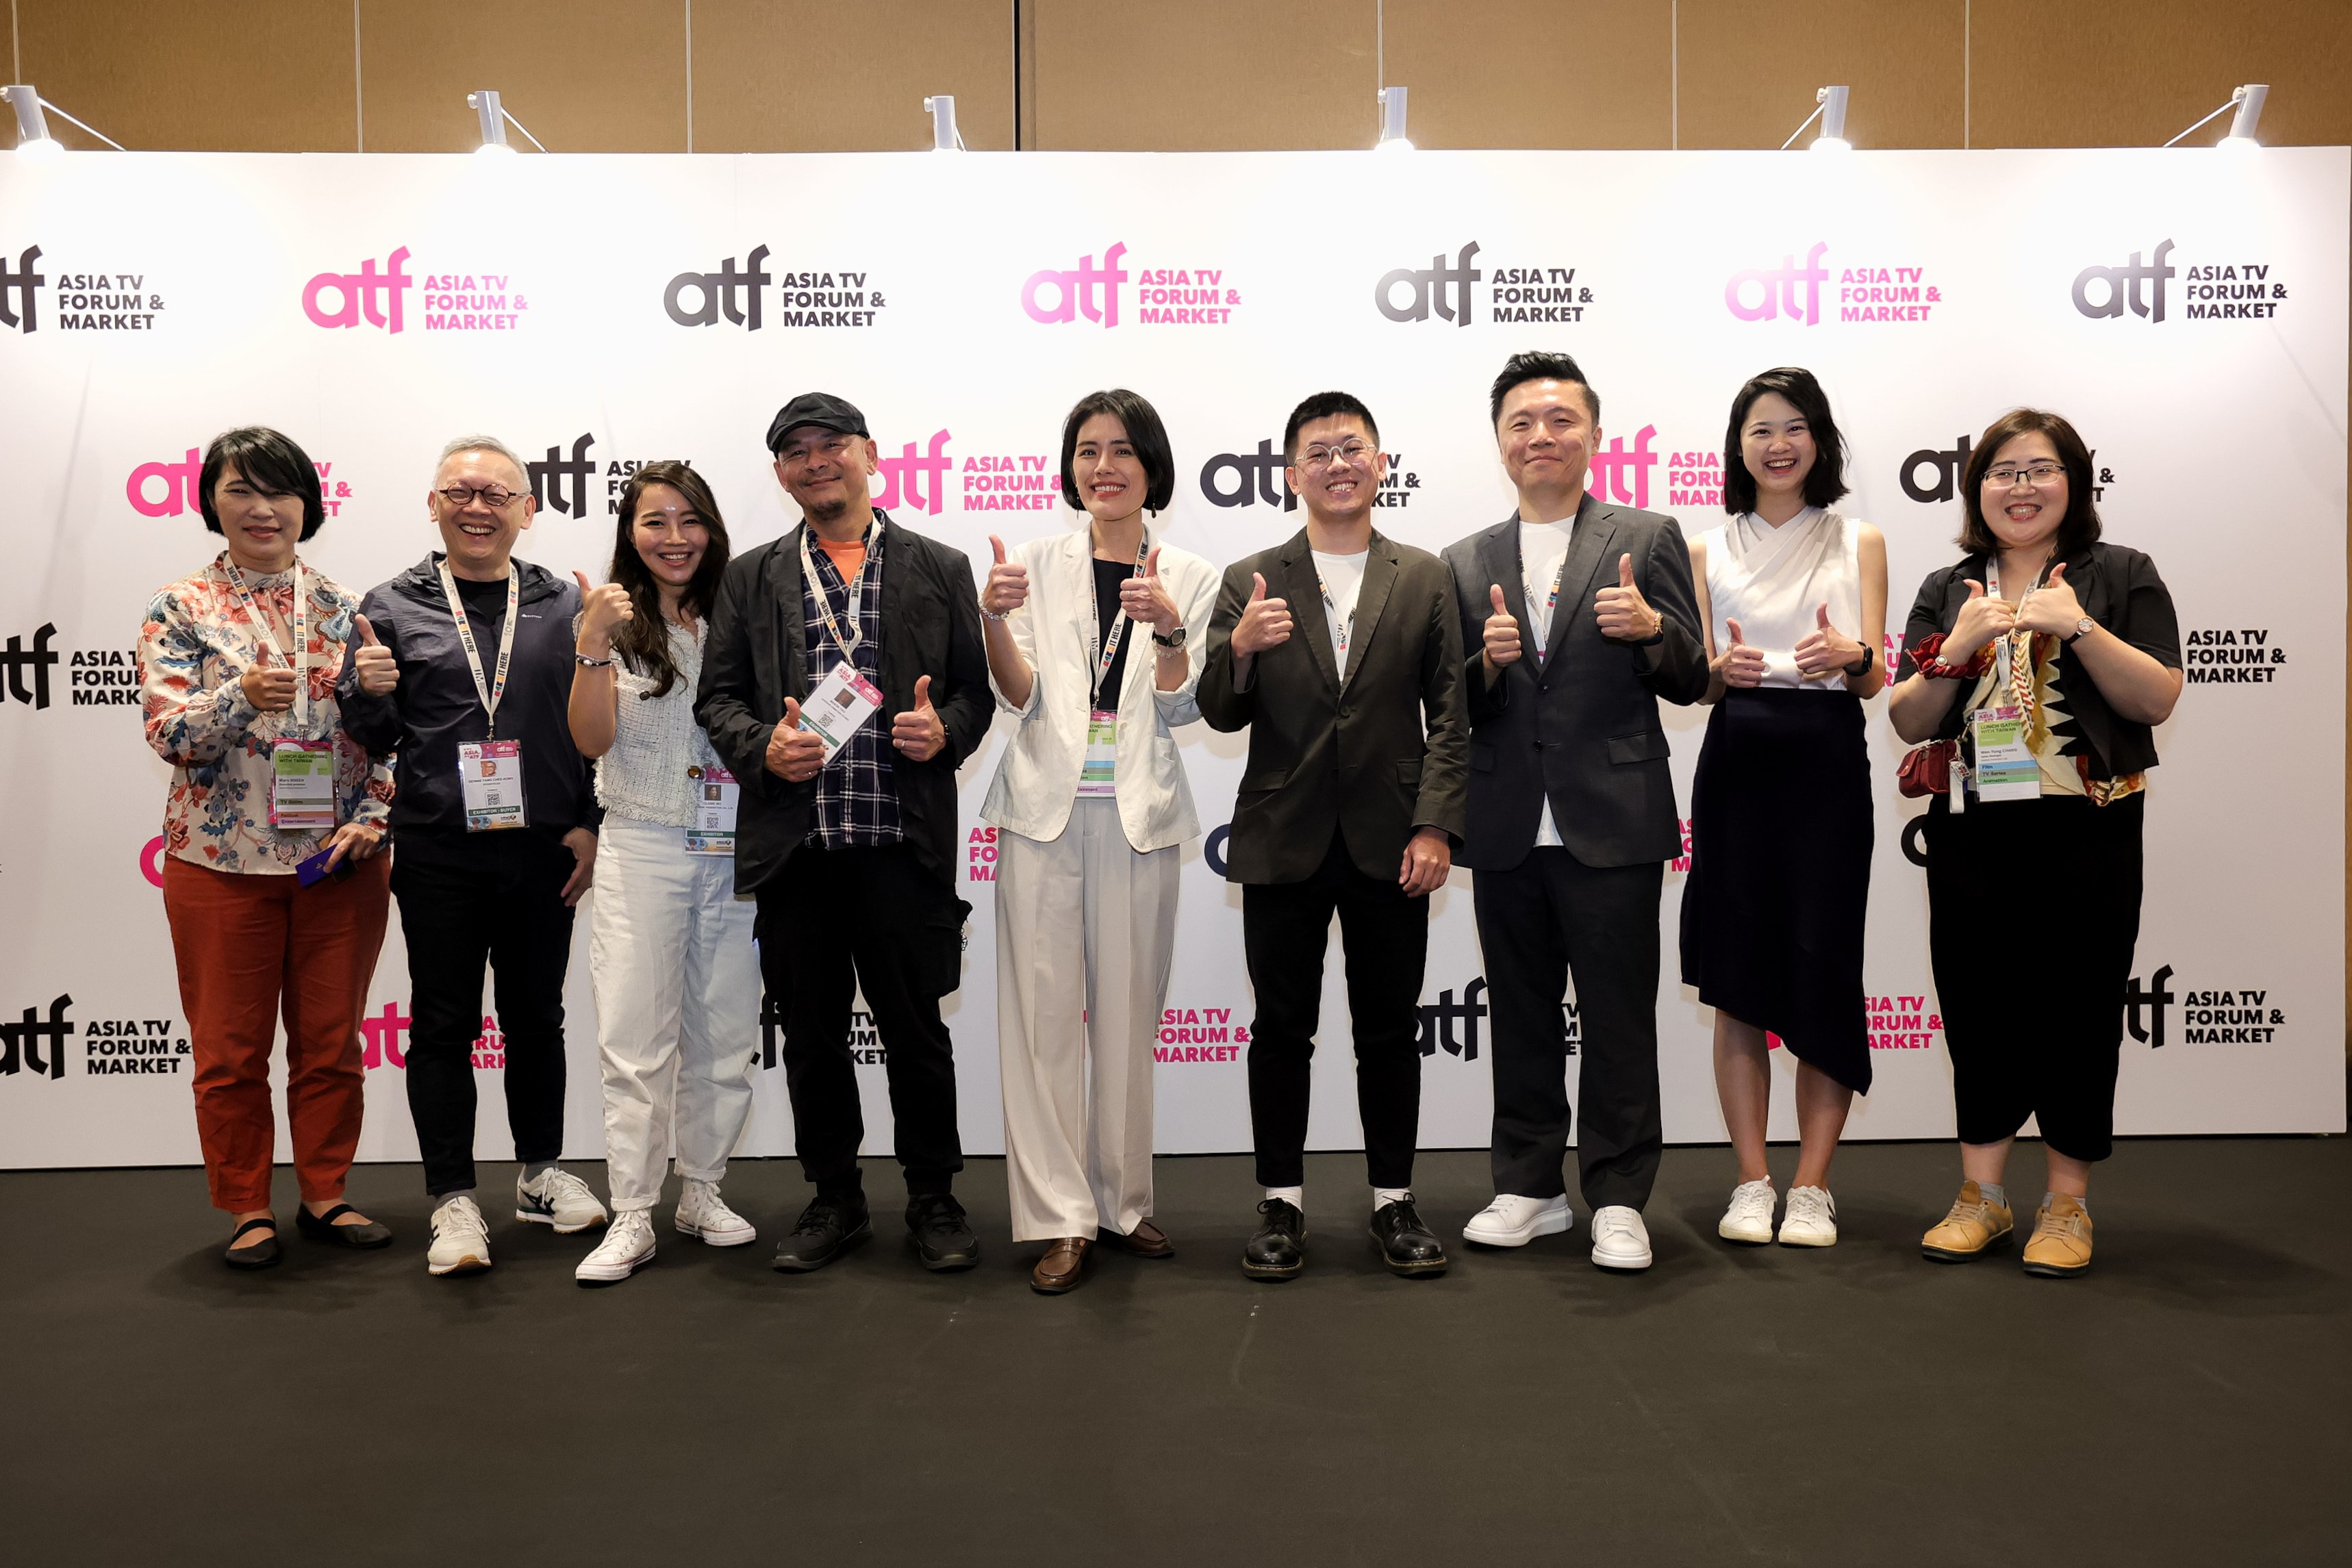 Islander and Brian selected for ATF Pitches Testify to Taiwan’s Creative Content